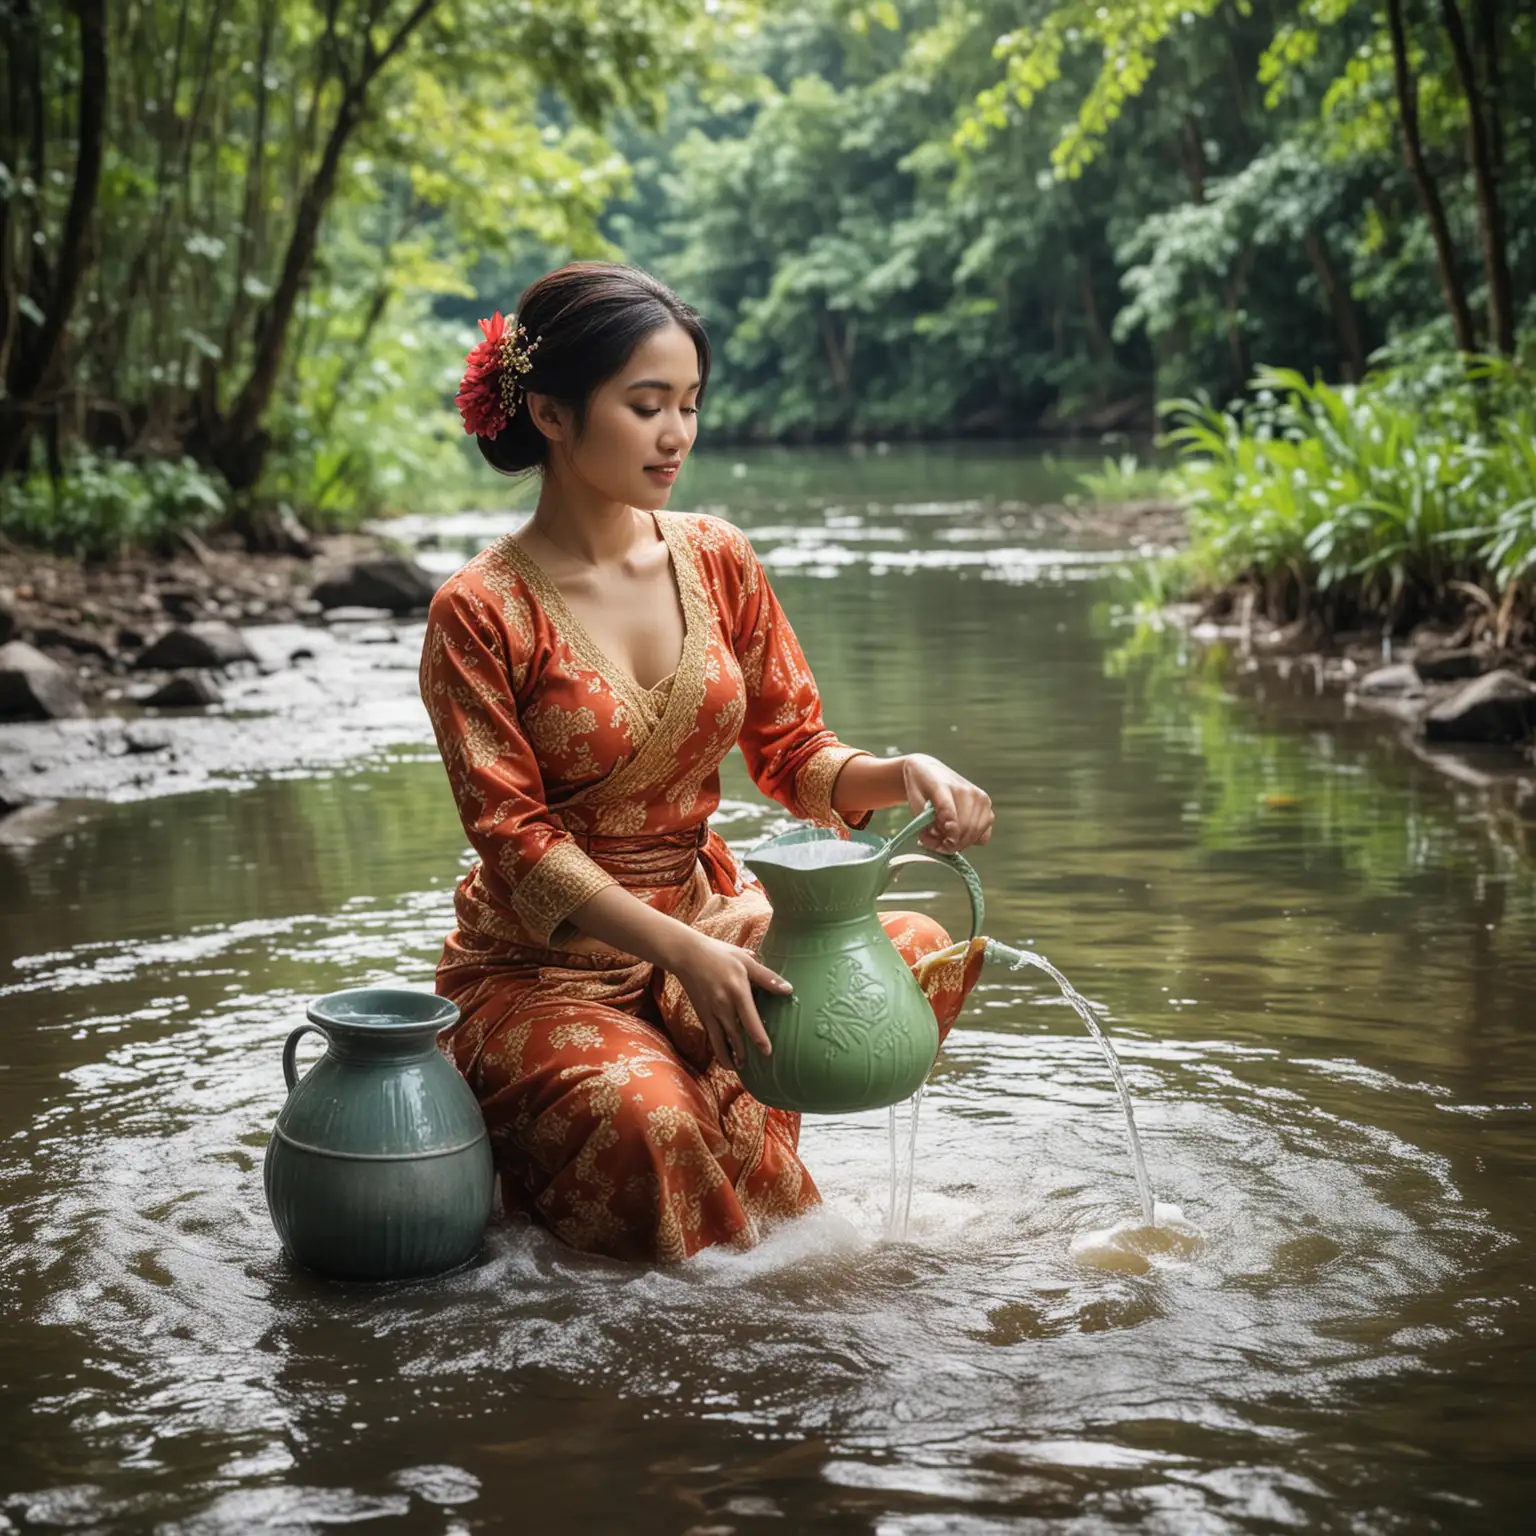 Traditional woman who is beautiful with (hairstyle), wearing kebaya, washing clothes with jug-clothes in the middle of river with view of forest that is lush, surrounded by friends